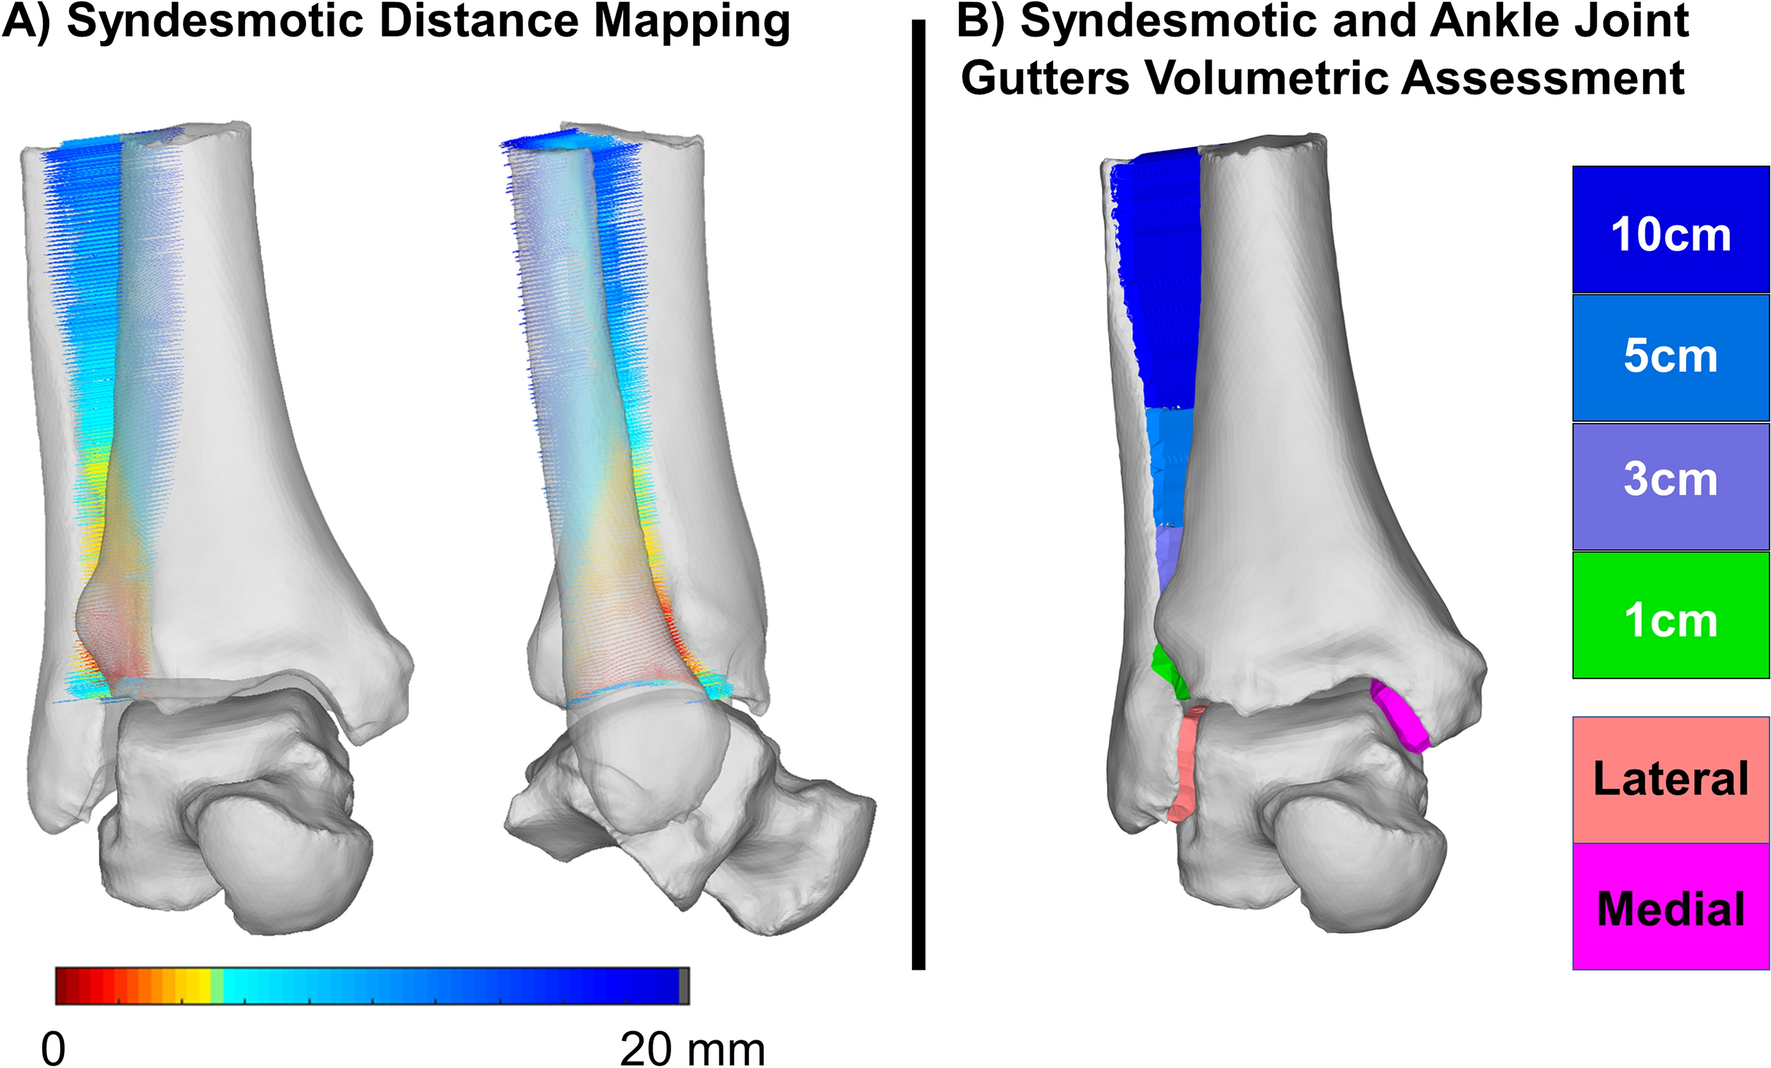 Distance mapping and volumetric assessment of the ankle and syndesmotic  joints in progressive collapsing foot deformity